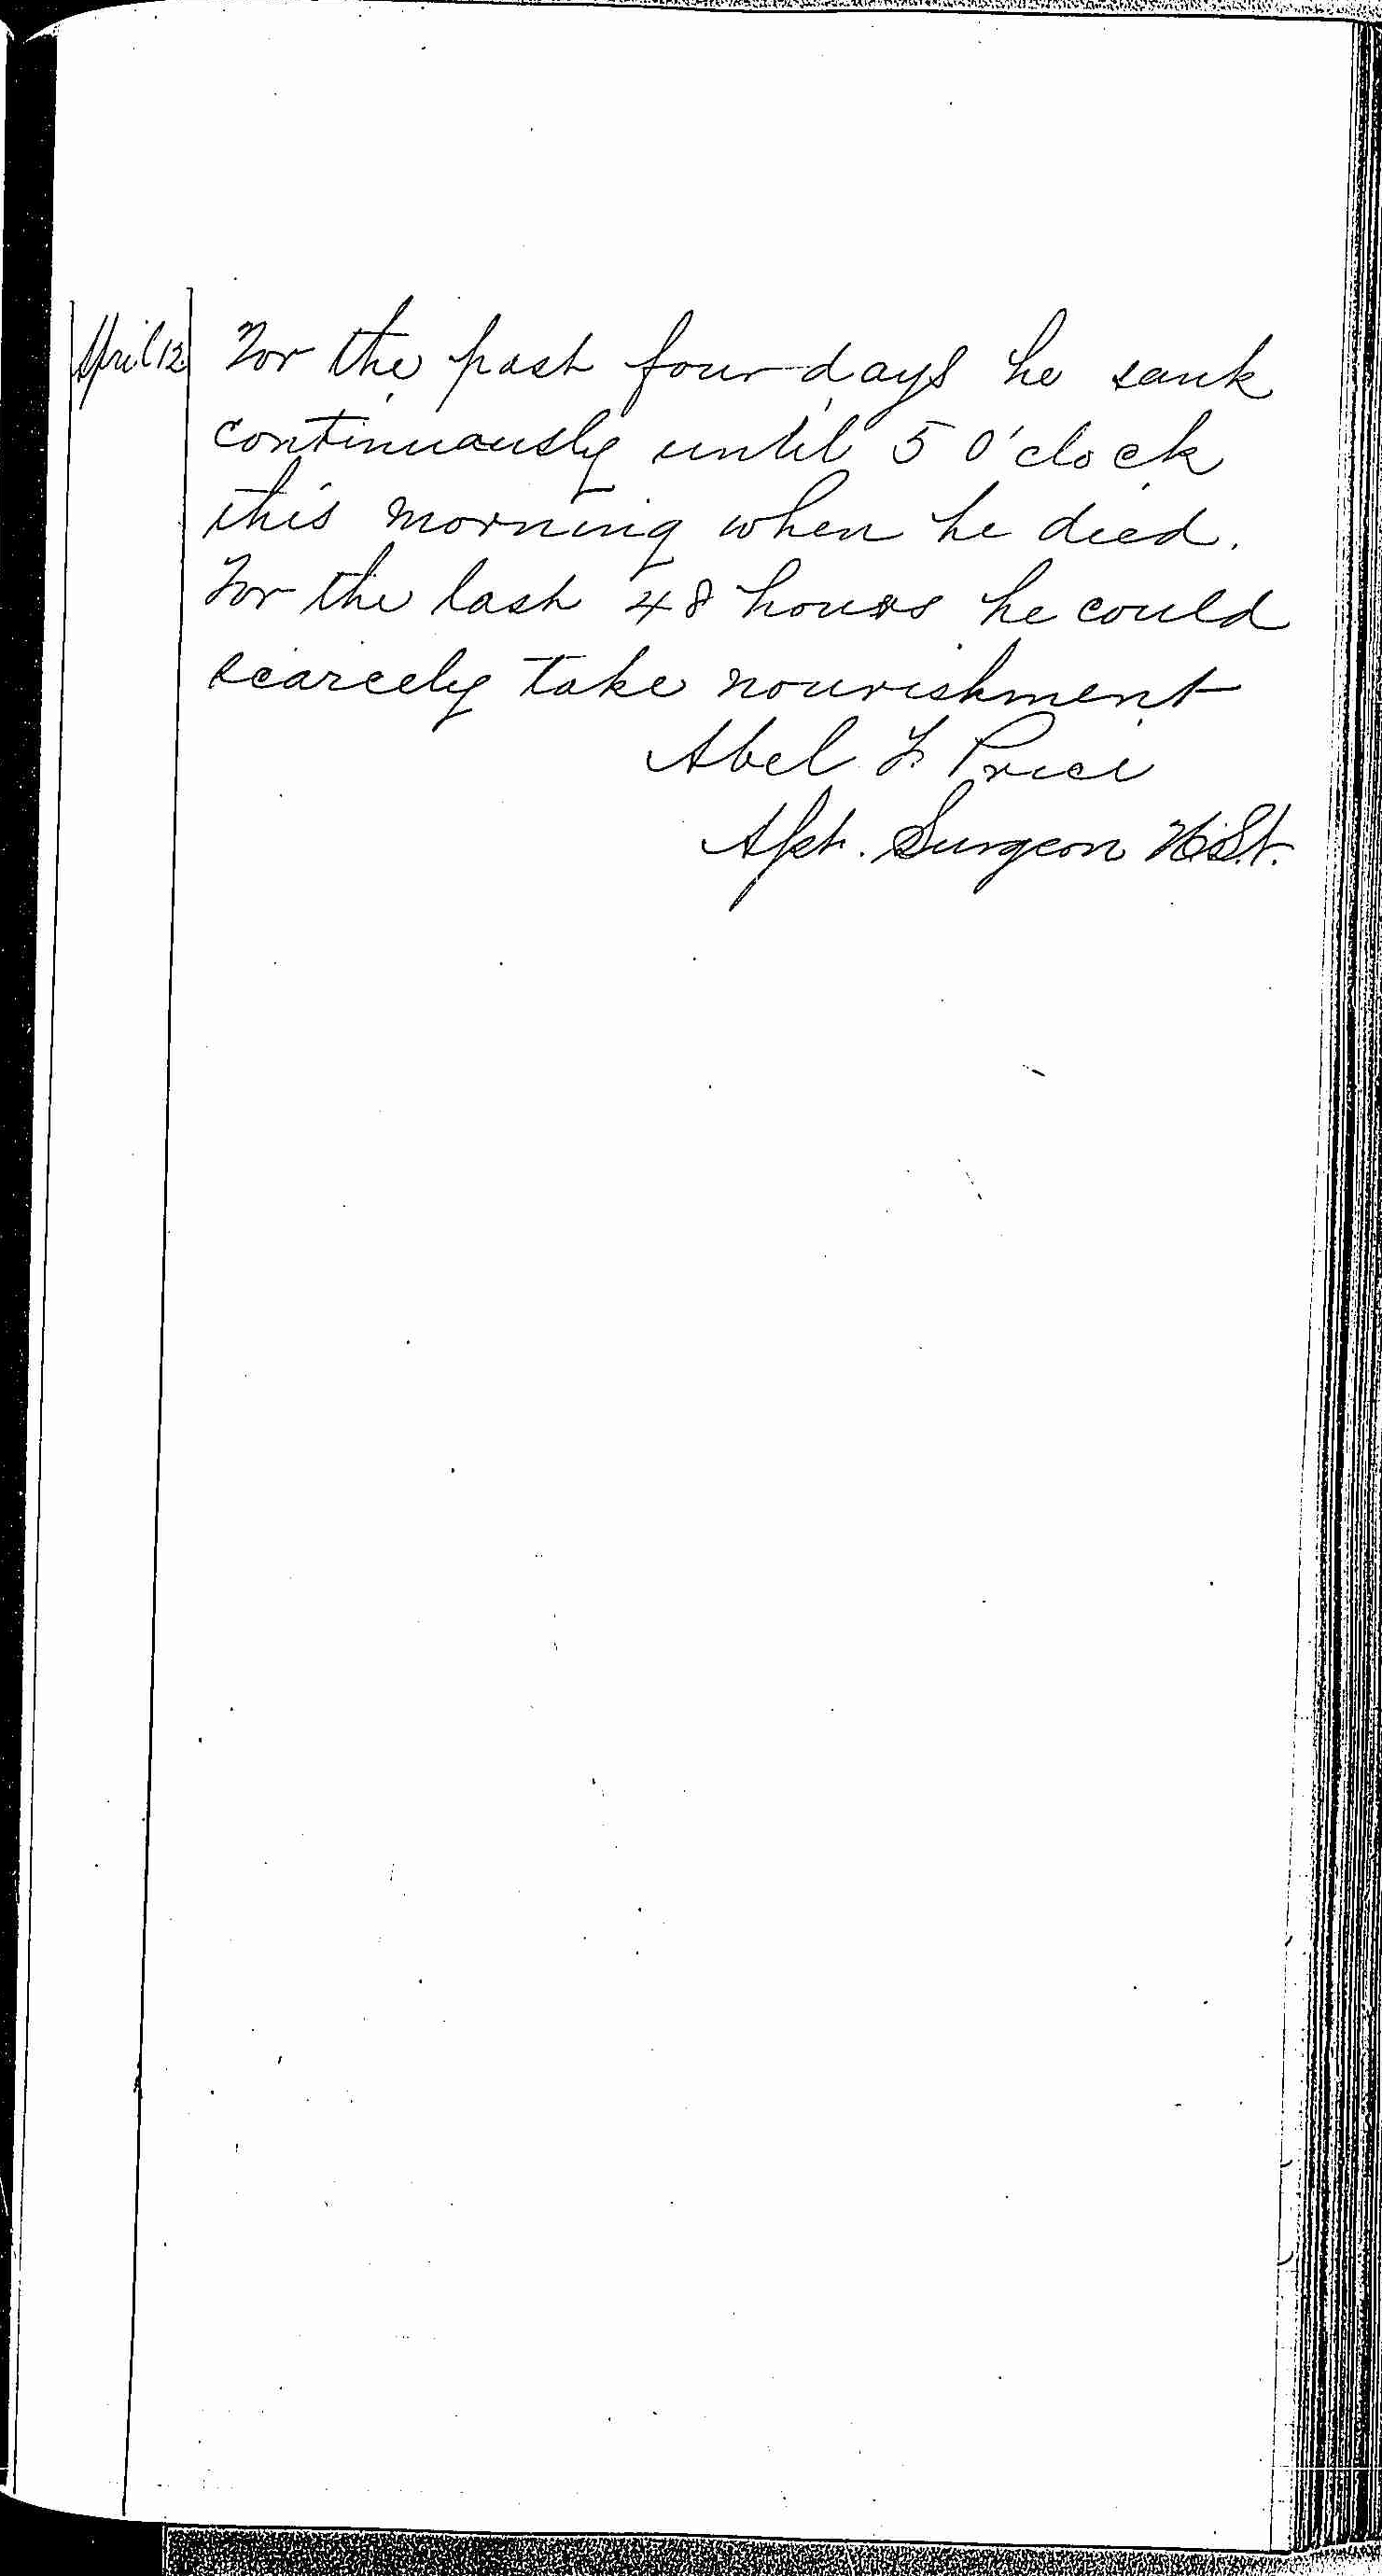 Entry for William Bathwell (page 13 of 13) in the log Hospital Tickets and Case Papers - Naval Hospital - Washington, D.C. - 1868-69